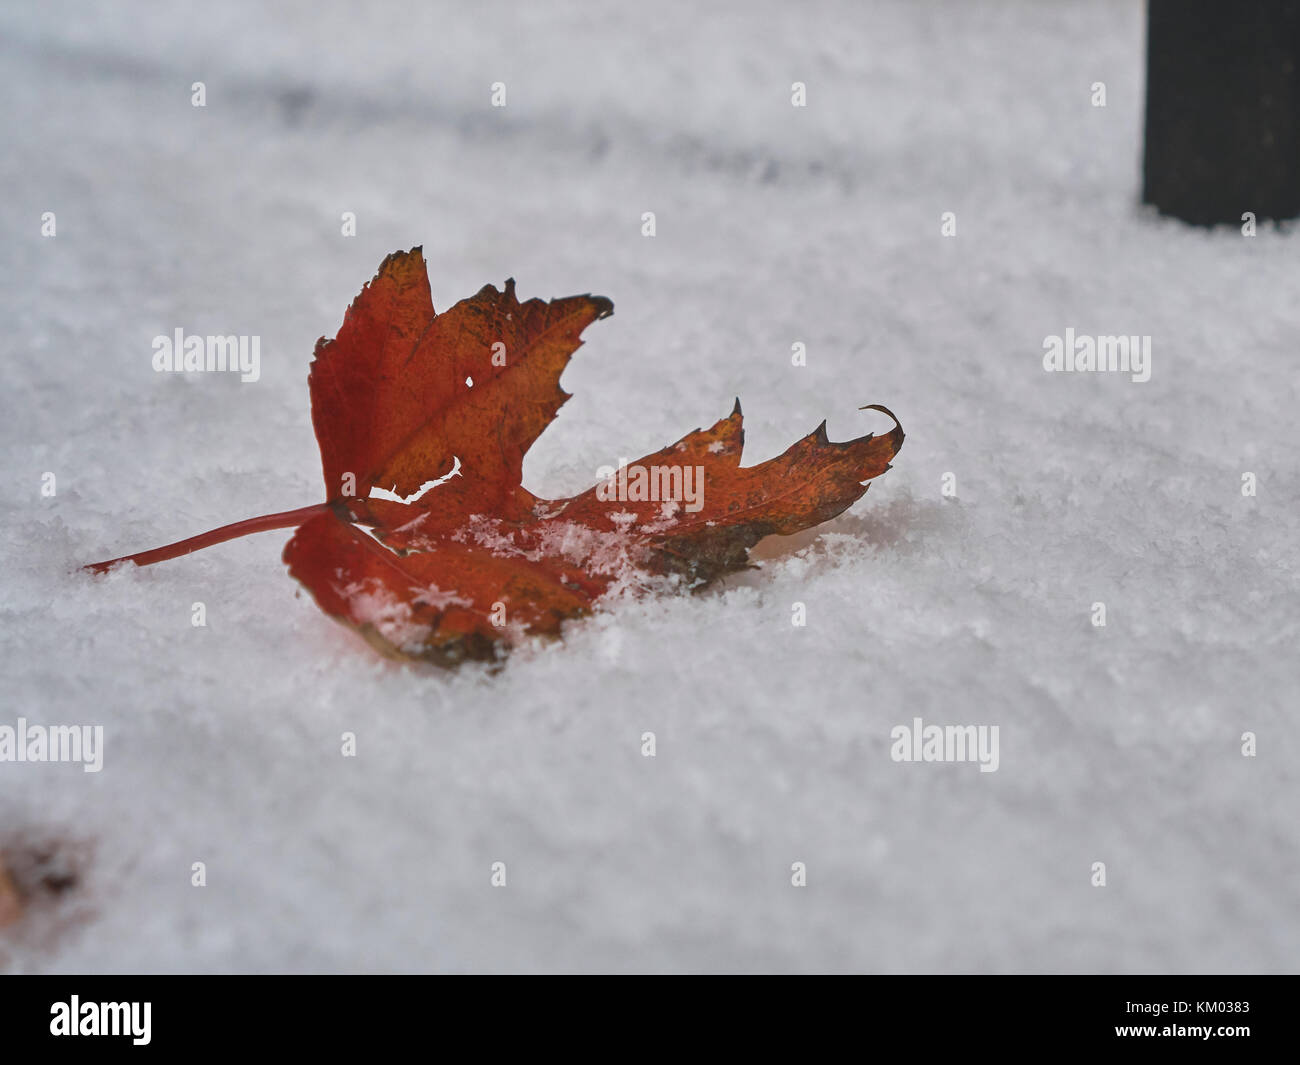 close-up of a fallen red maple leave with newly fallen snow Stock Photo